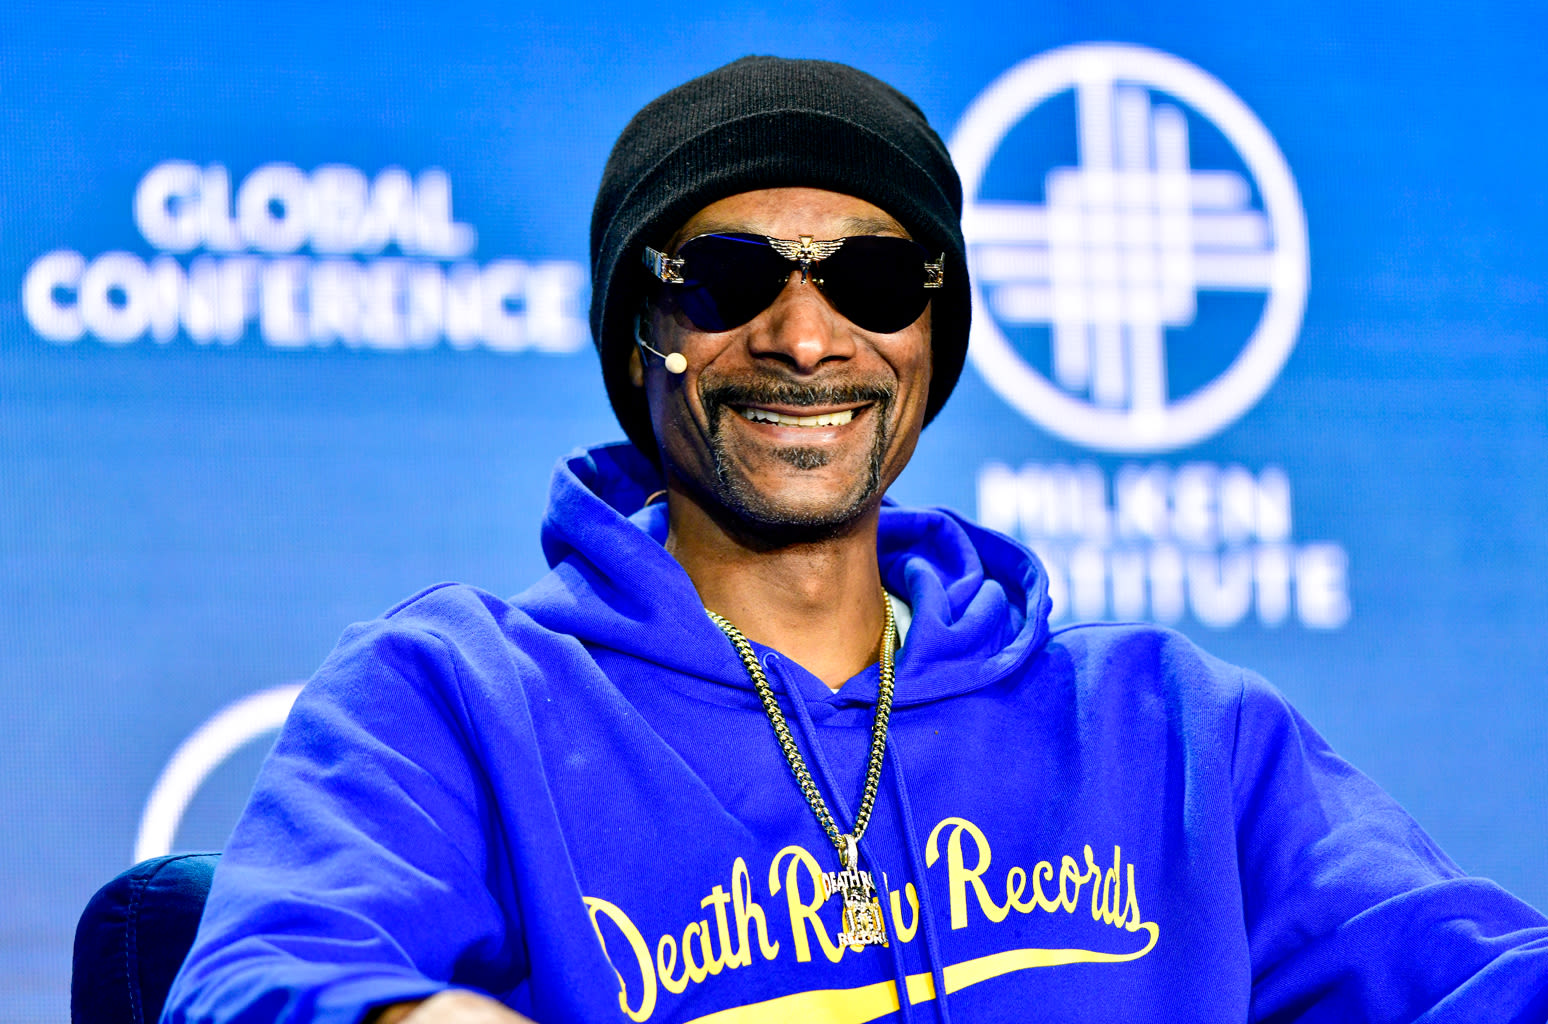 Snoop Dogg Talks Olympics, ‘The Voice’ Coaching Roles: ‘I’m The People’s Champ’